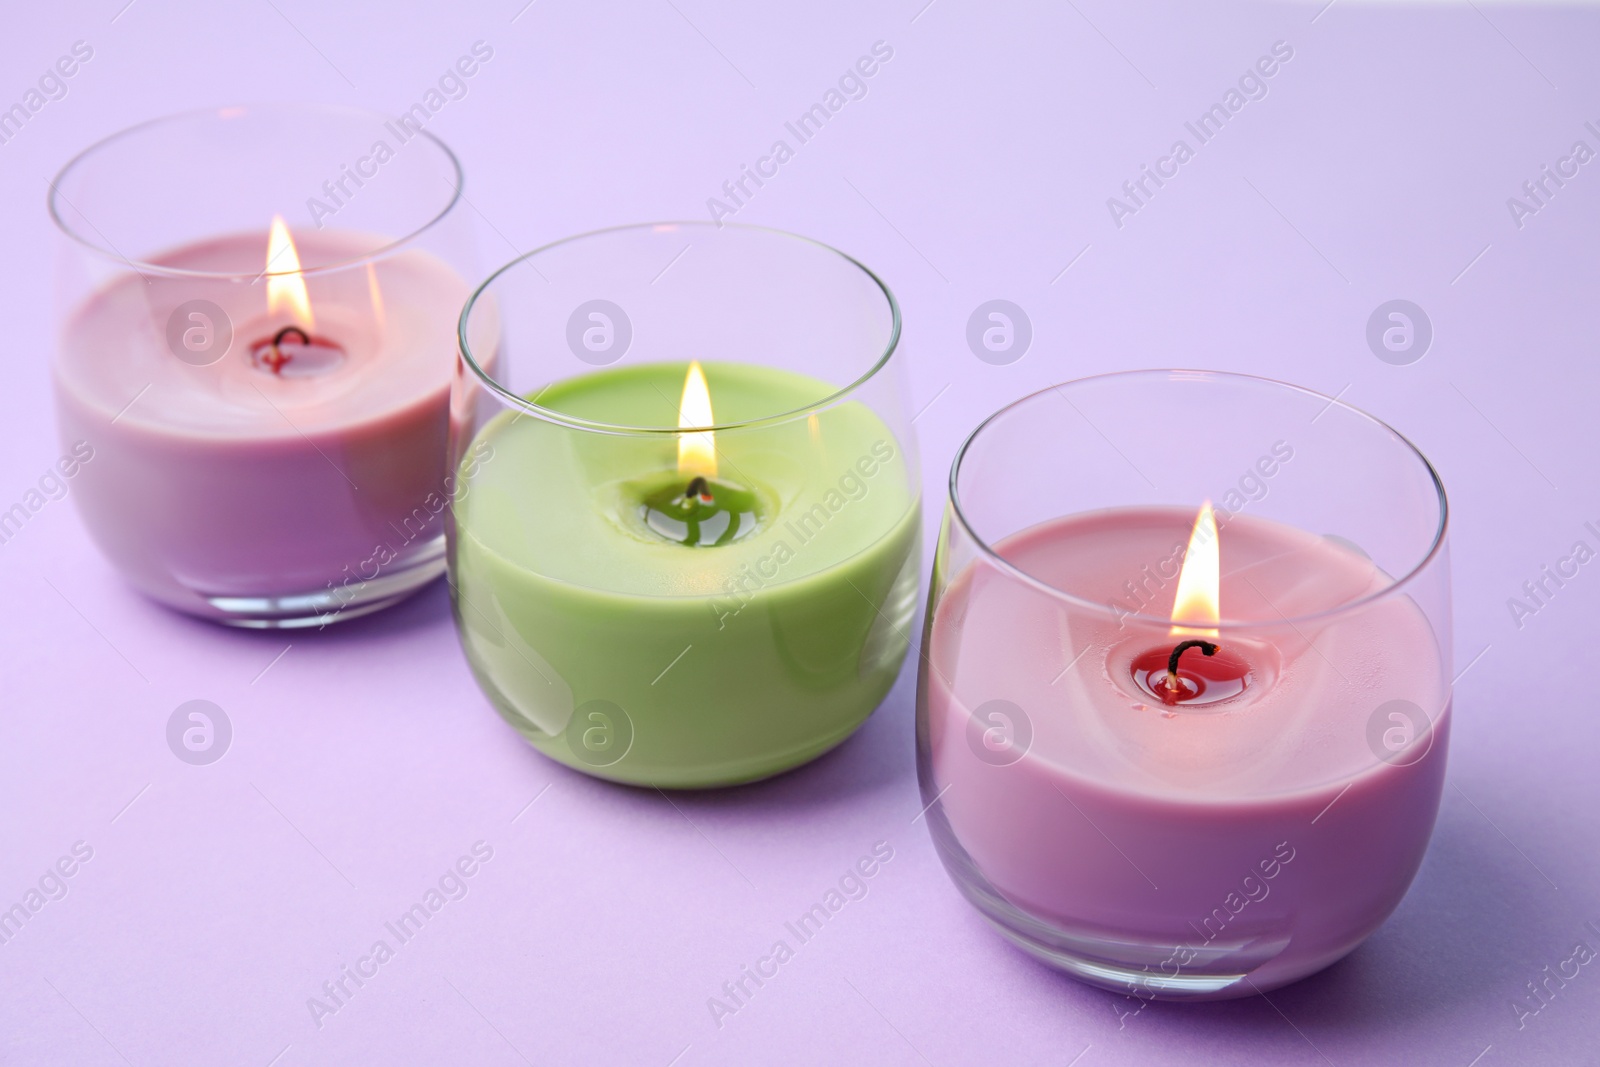 Photo of Burning wax candles in glass holders on purple background